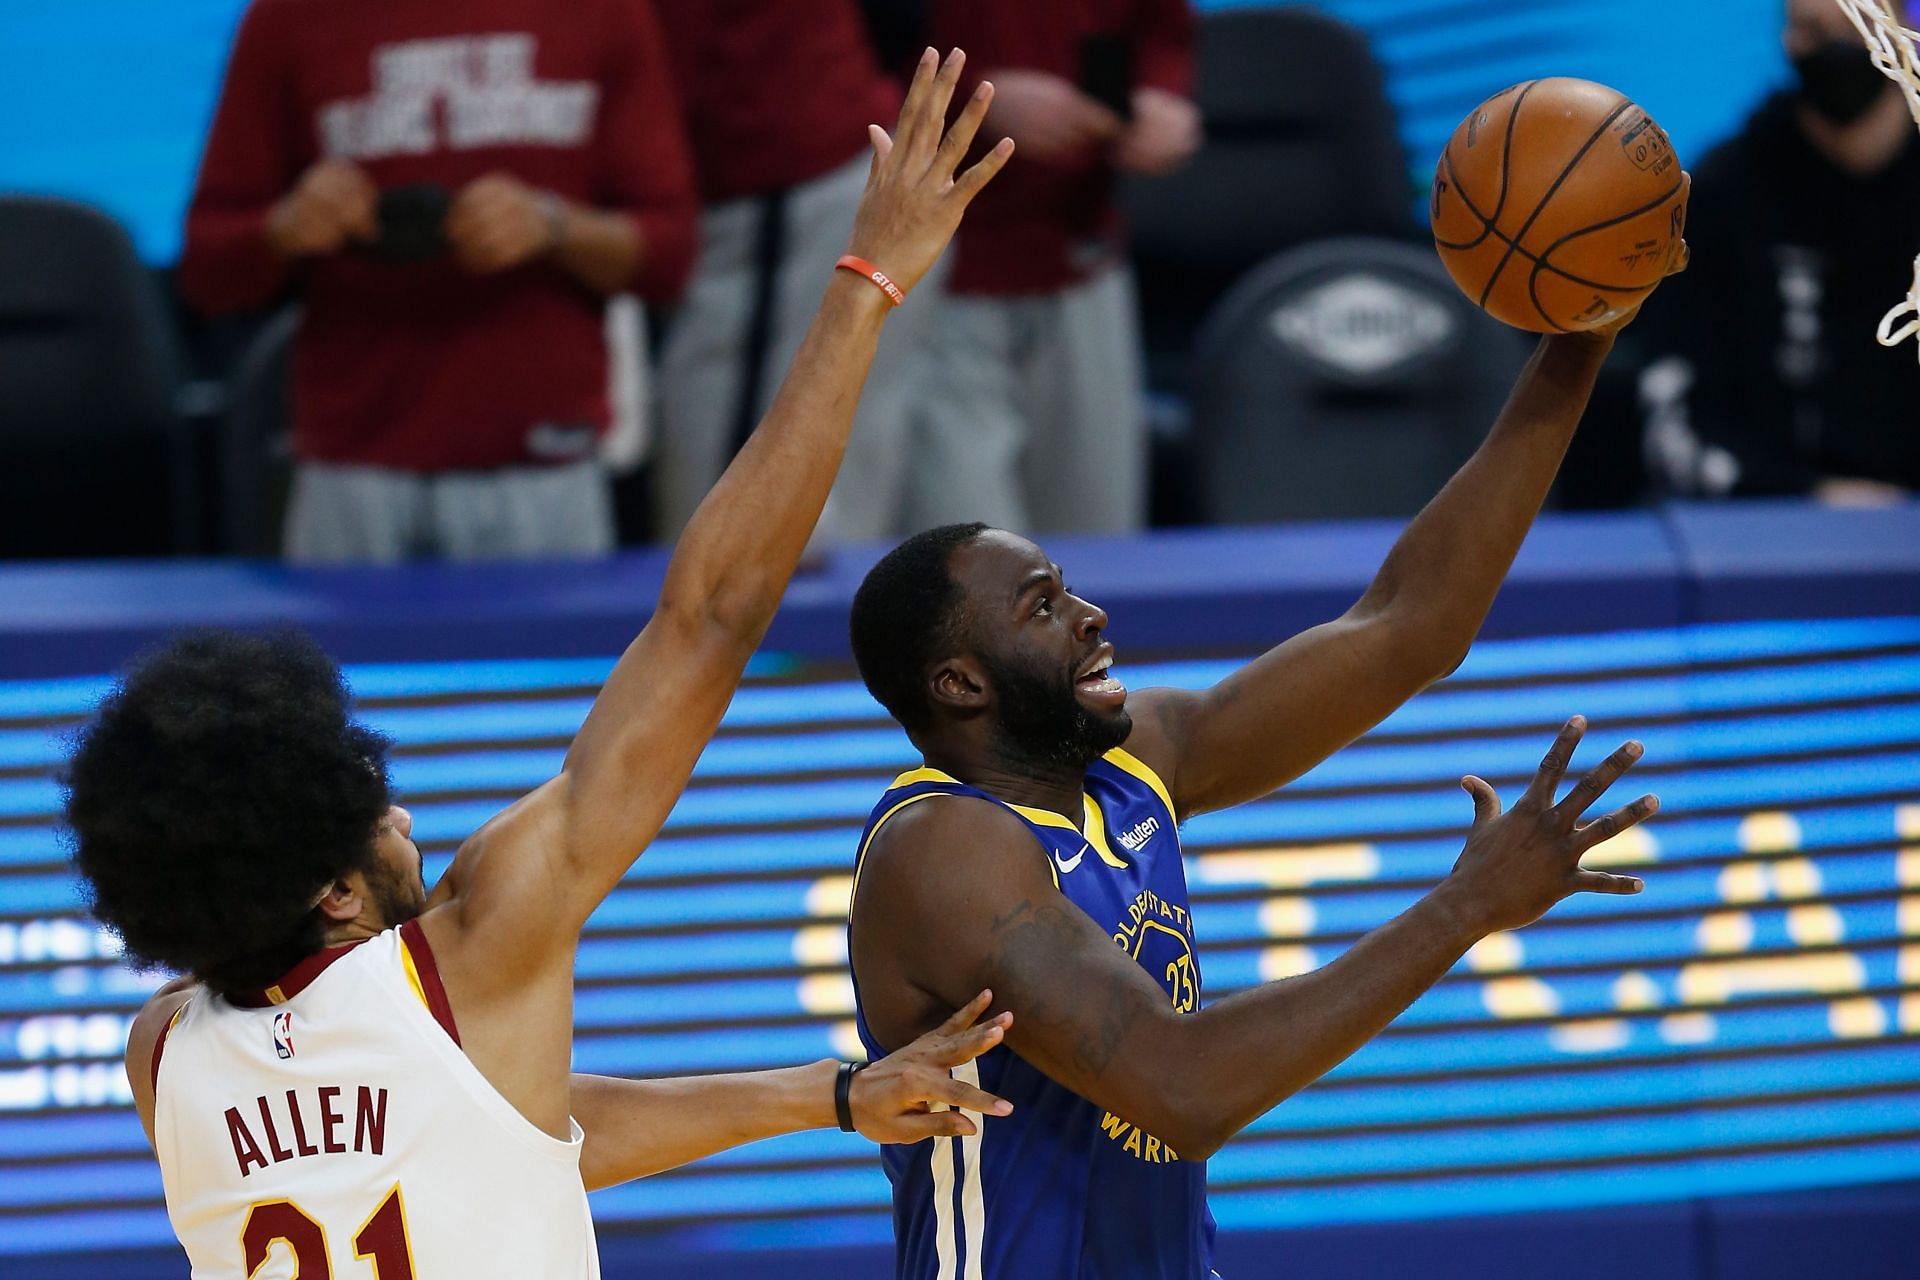 The Cleveland Cavaliers will host the Golden State Warriors in a regular-season game on November 19th